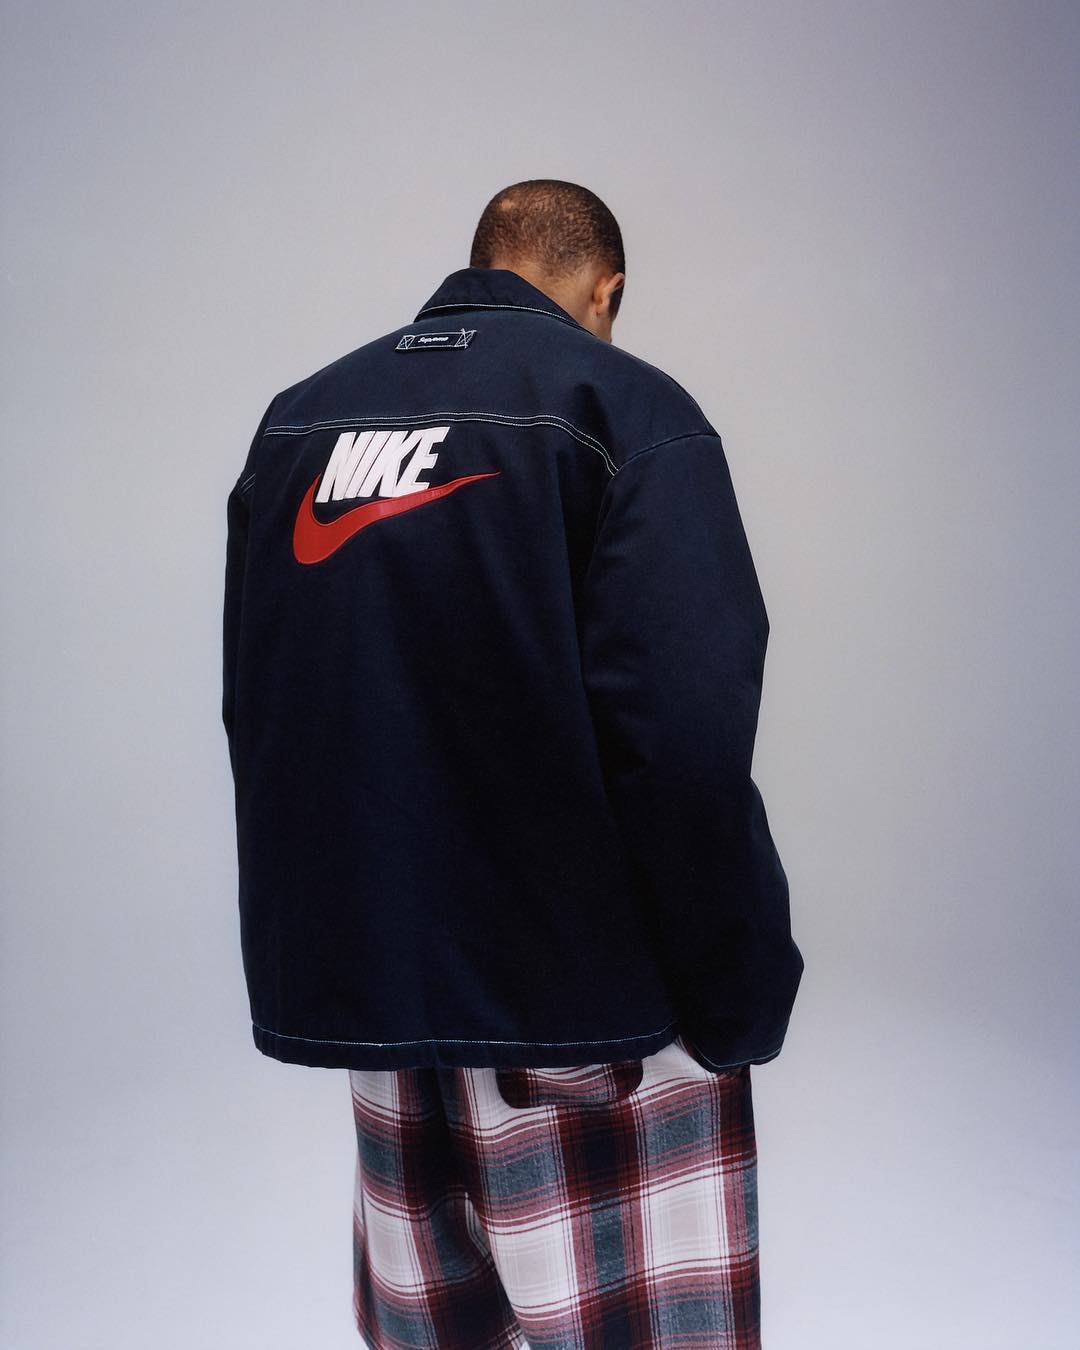 supreme-nike-18aw-2nd-delivery-collaboration-release-20180929-week6-lookbook